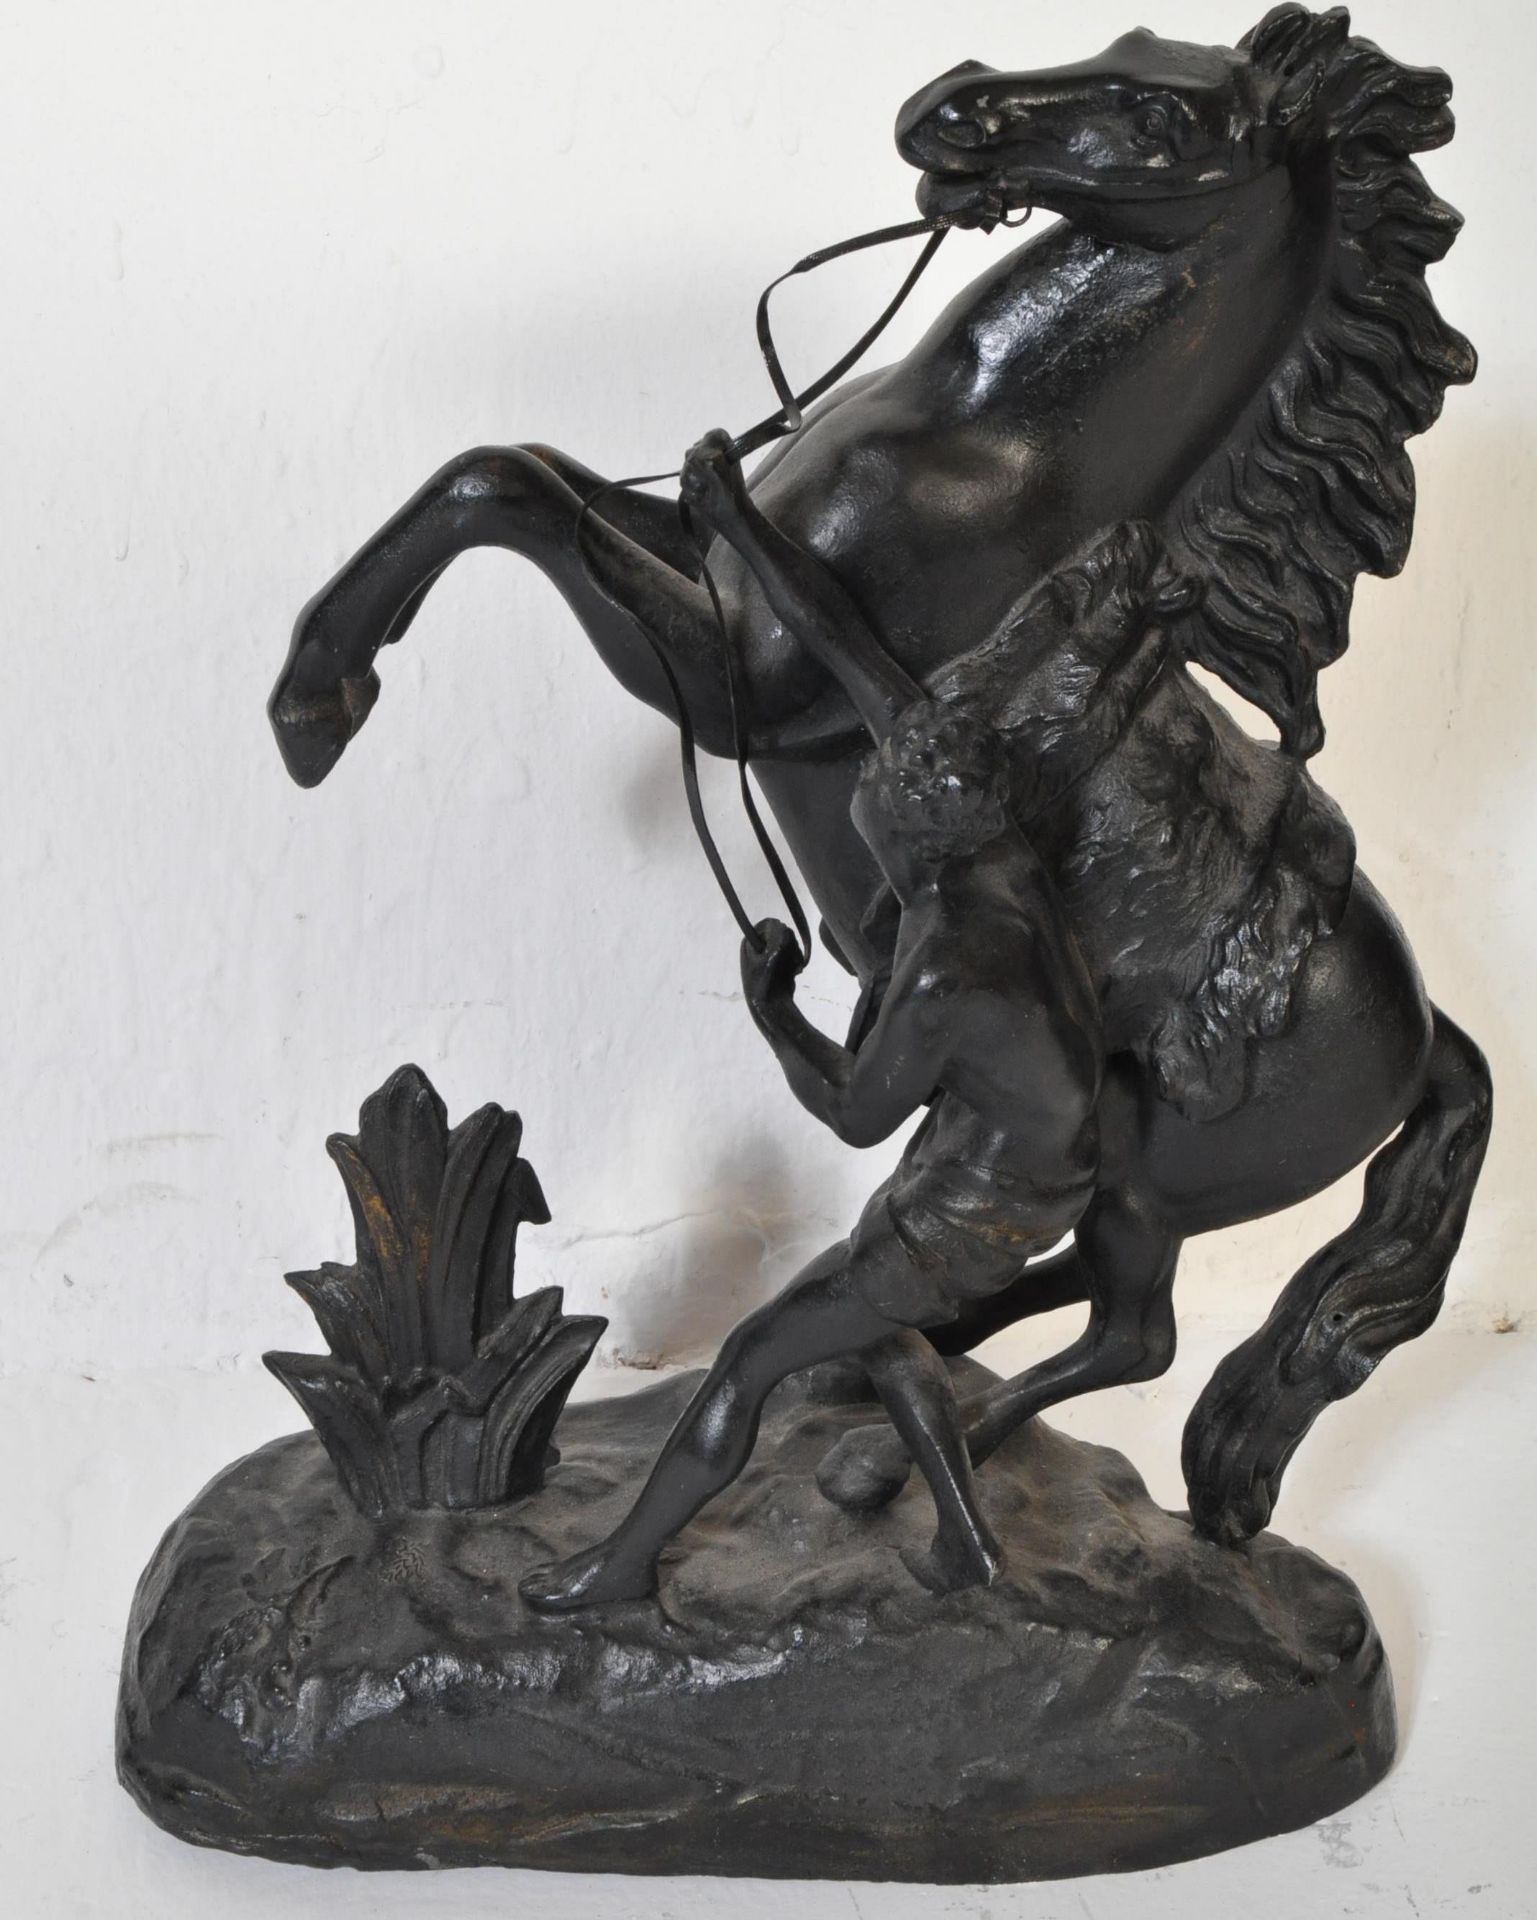 PAIR OF VICTORIAN SPELTER MARLEY HORSES - Image 3 of 6